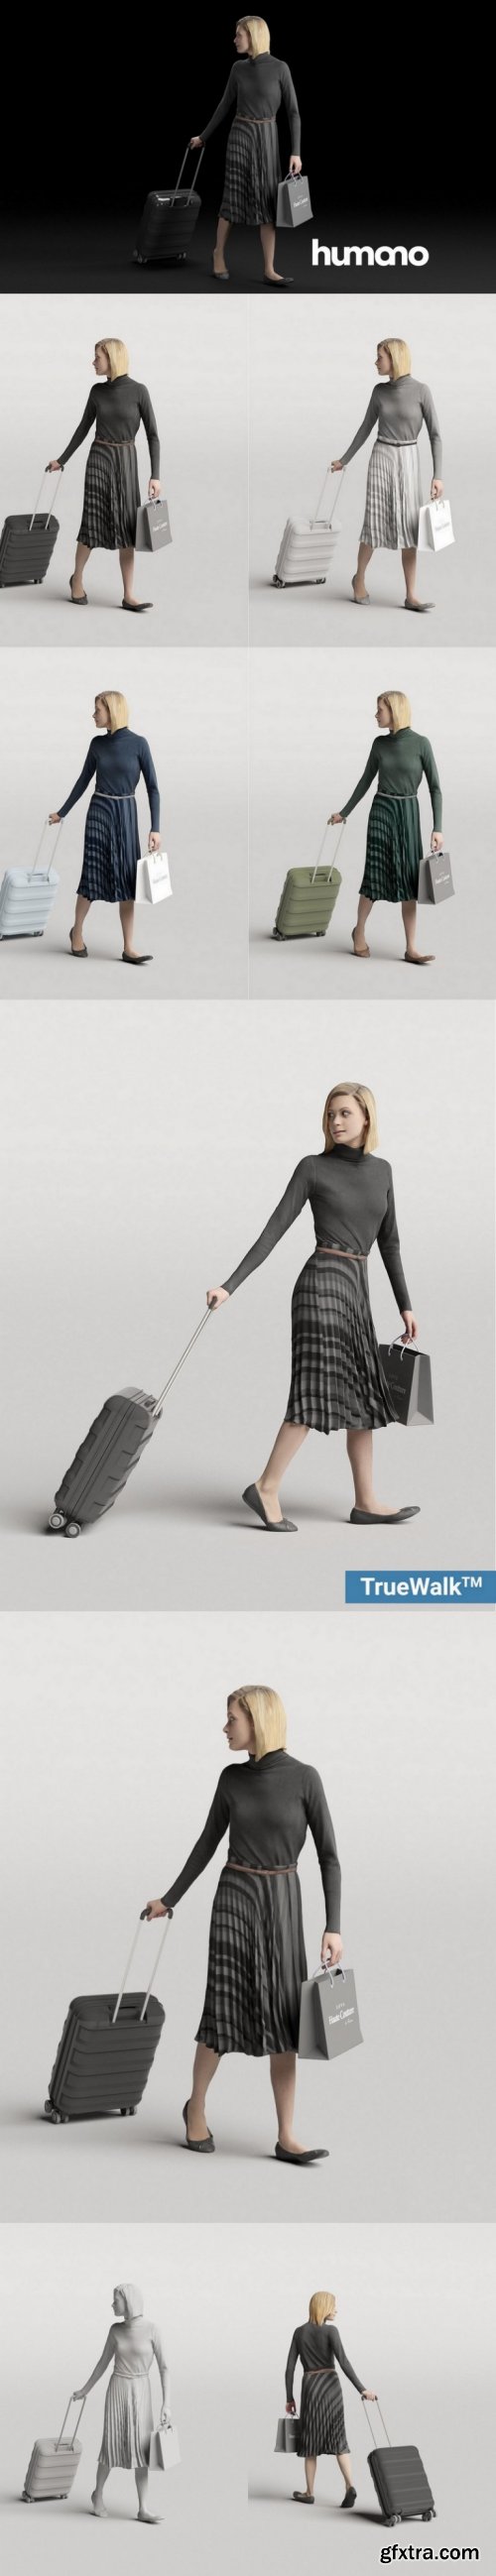 Humano Elegant Woman in skirt Walking with a suitcase 0309 3D model